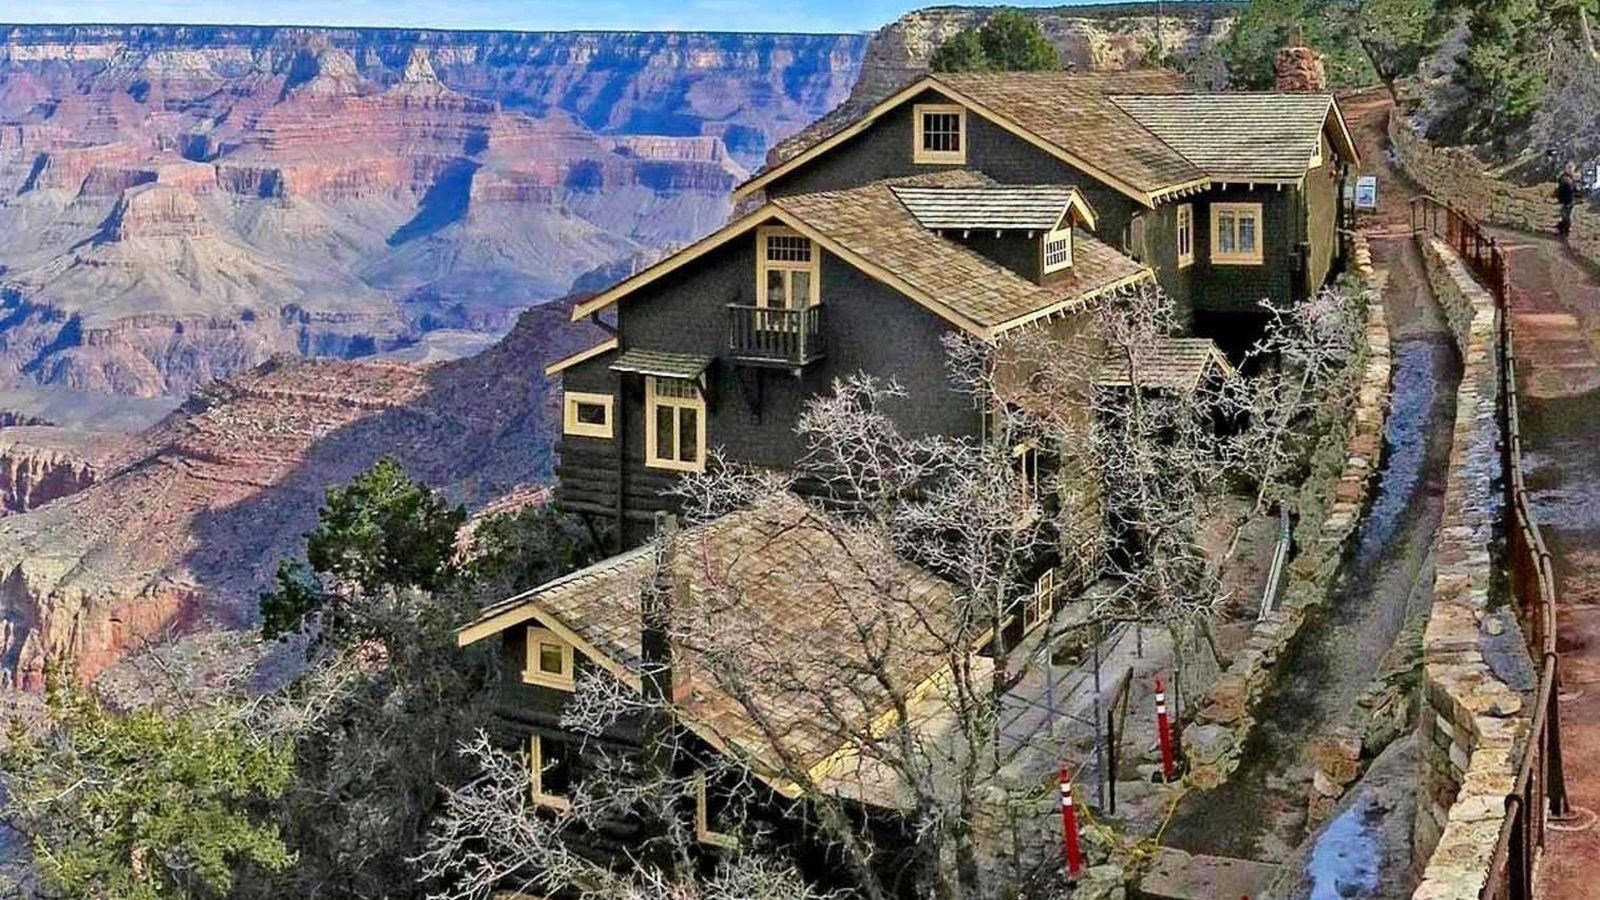 a rambling multi-story craftsman style wood frame building perched on the edge of a canyon cliff.